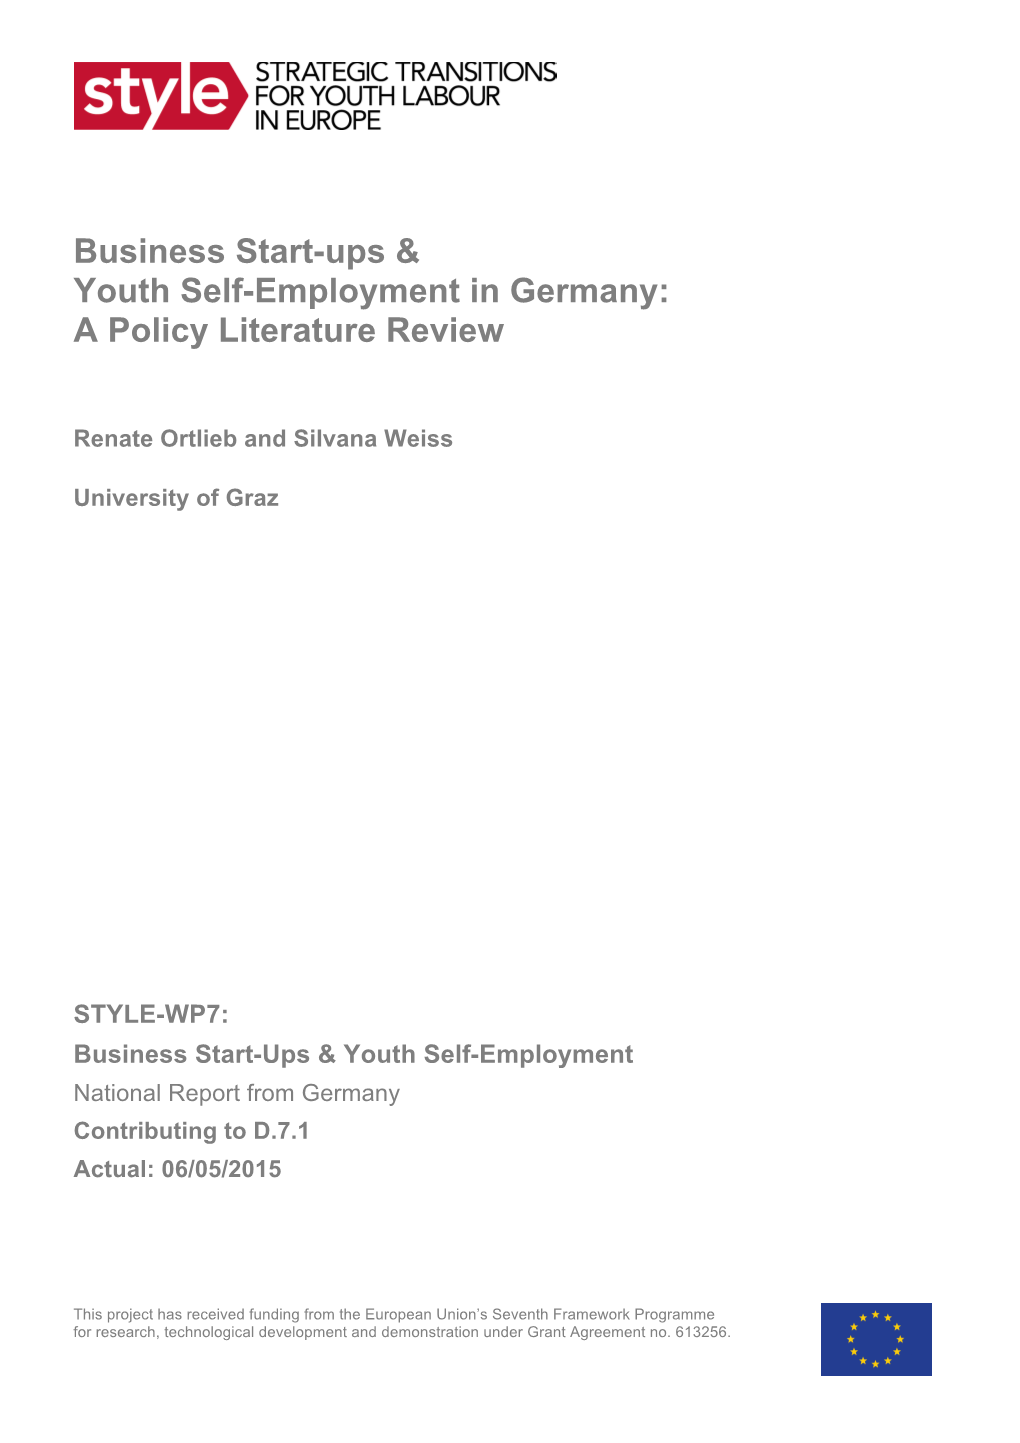 Business Start-Ups & Youth Self-Employment in Germany